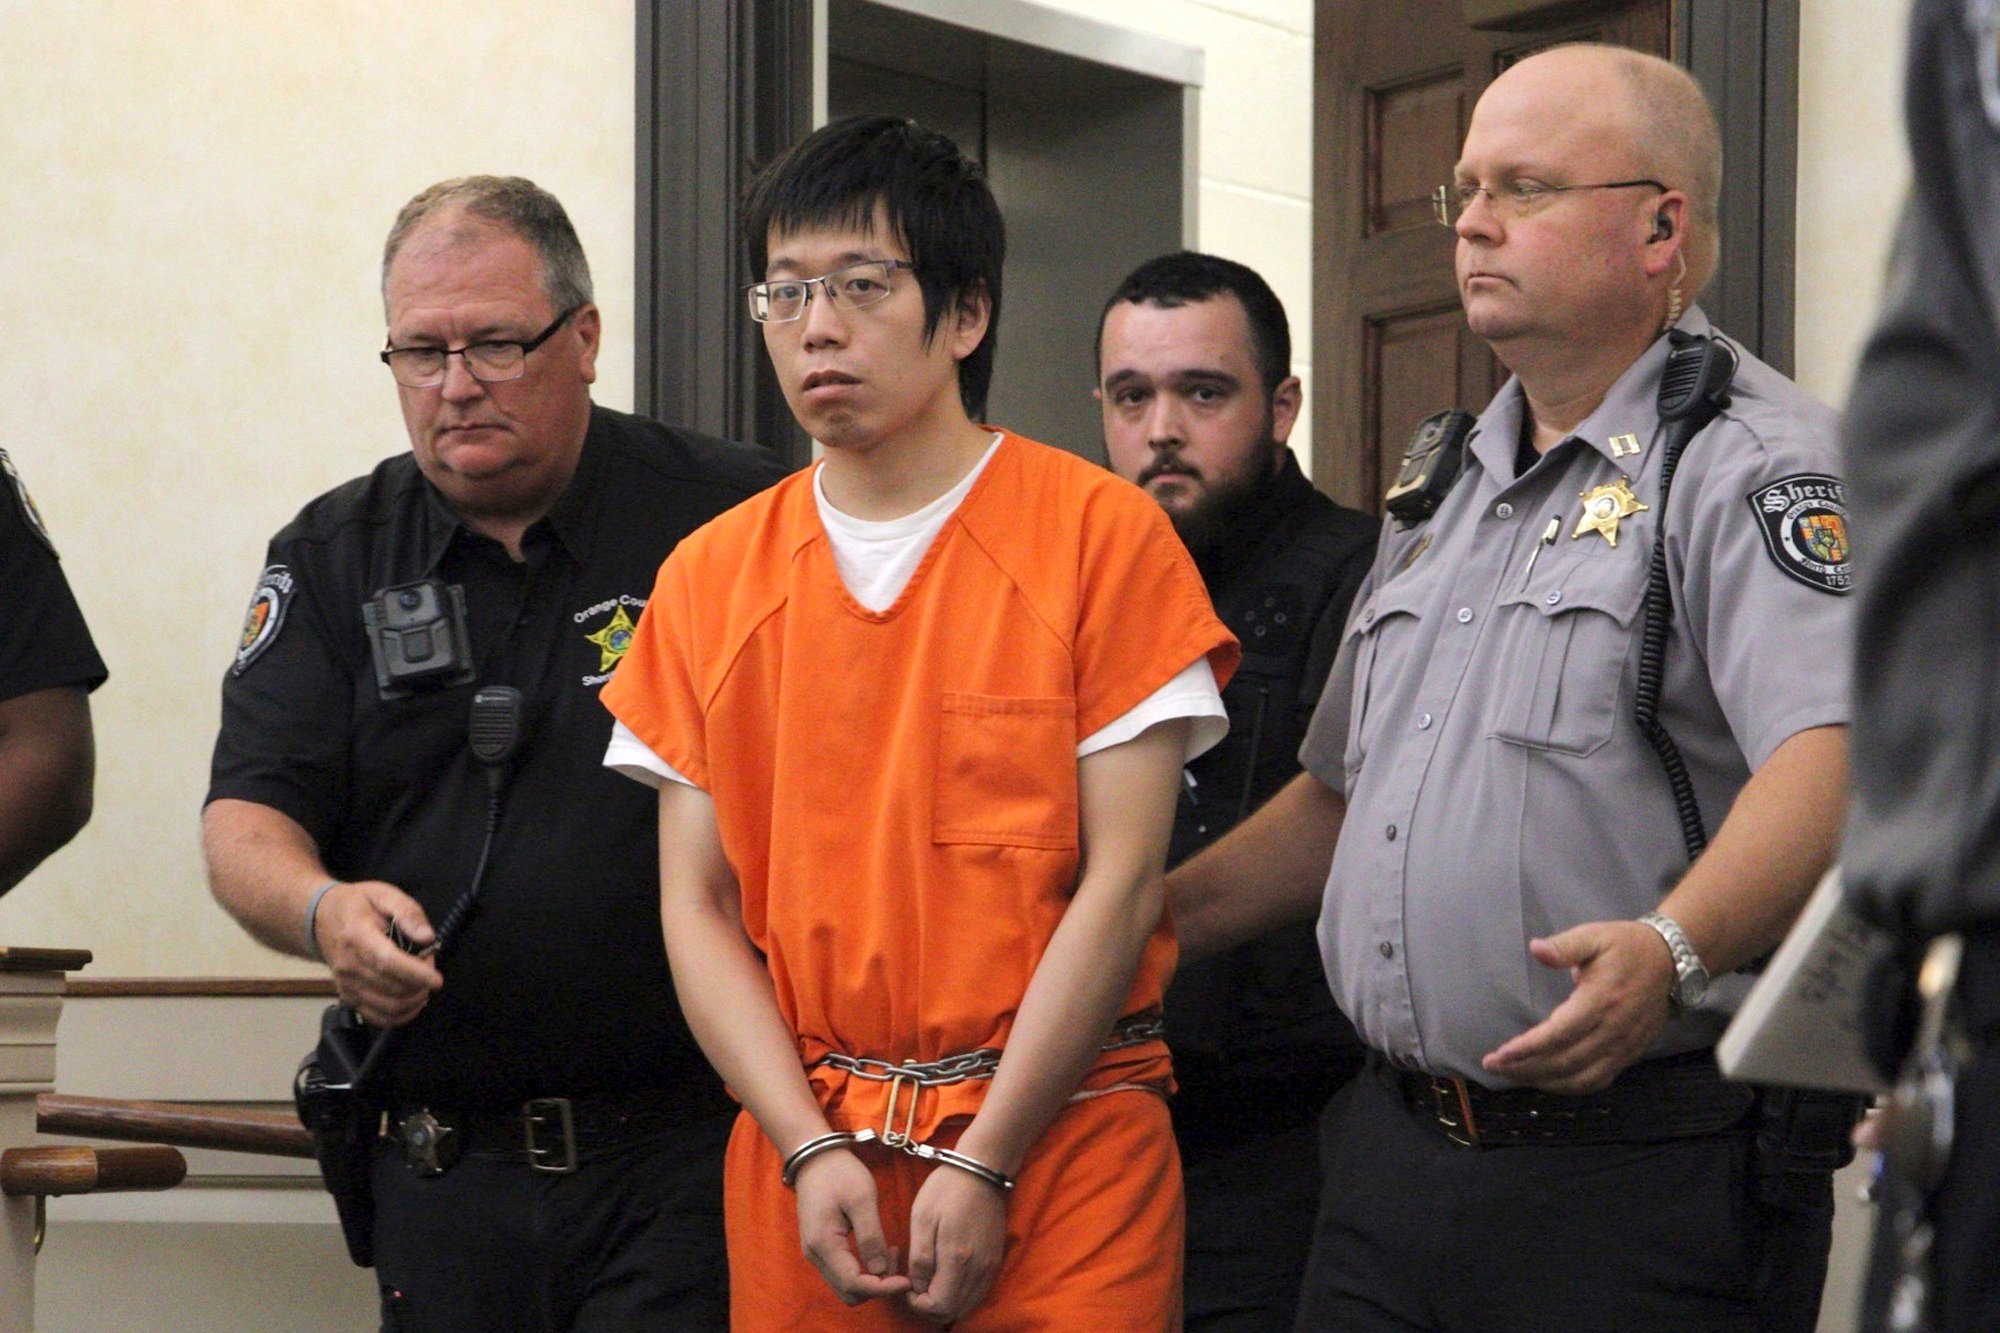 Tailei Qi, charged in the fatal shooting of a University of North Carolina at Chapel Hill faculty member, appears at the Orange County Courthouse in Hillsborough, North Carolina, on Tuesday. Photo: AP